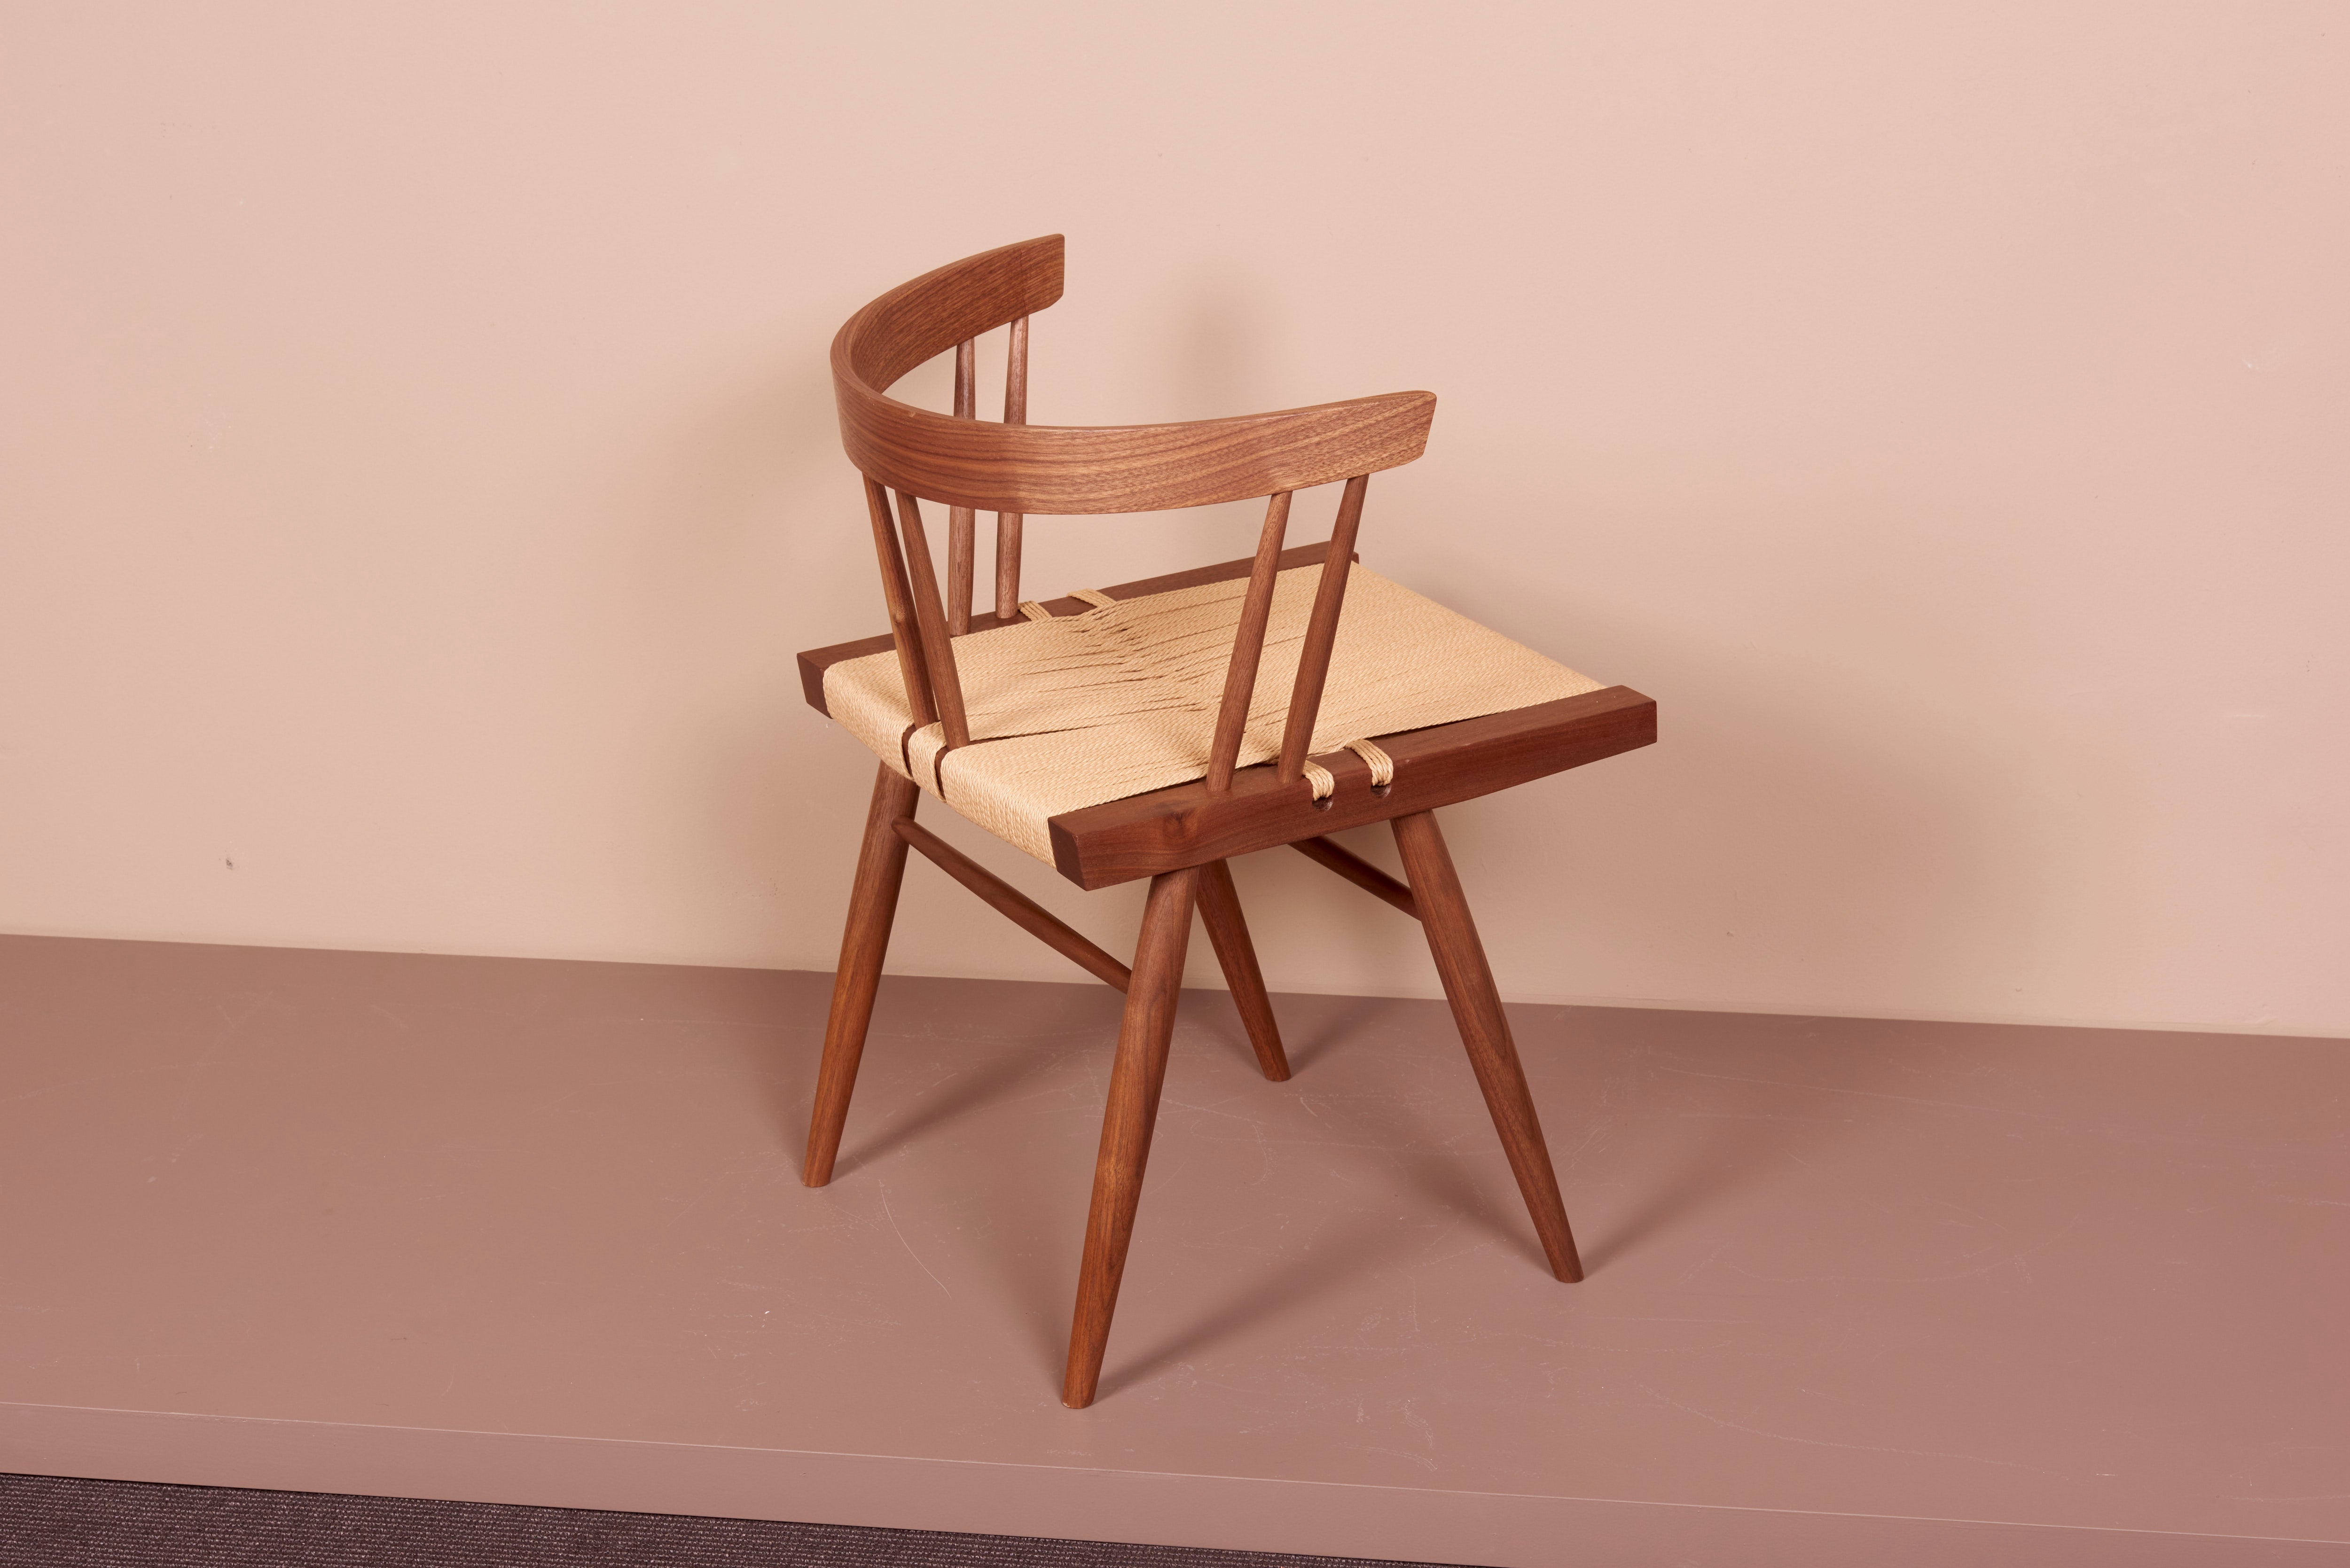 grass-seated chair, designed by George Nakashima and manufactured by George Nakashima Studio in the US. The square seat typically found in walnut and woven sea-grass. One chair is in stock and available now, more is available on order (please